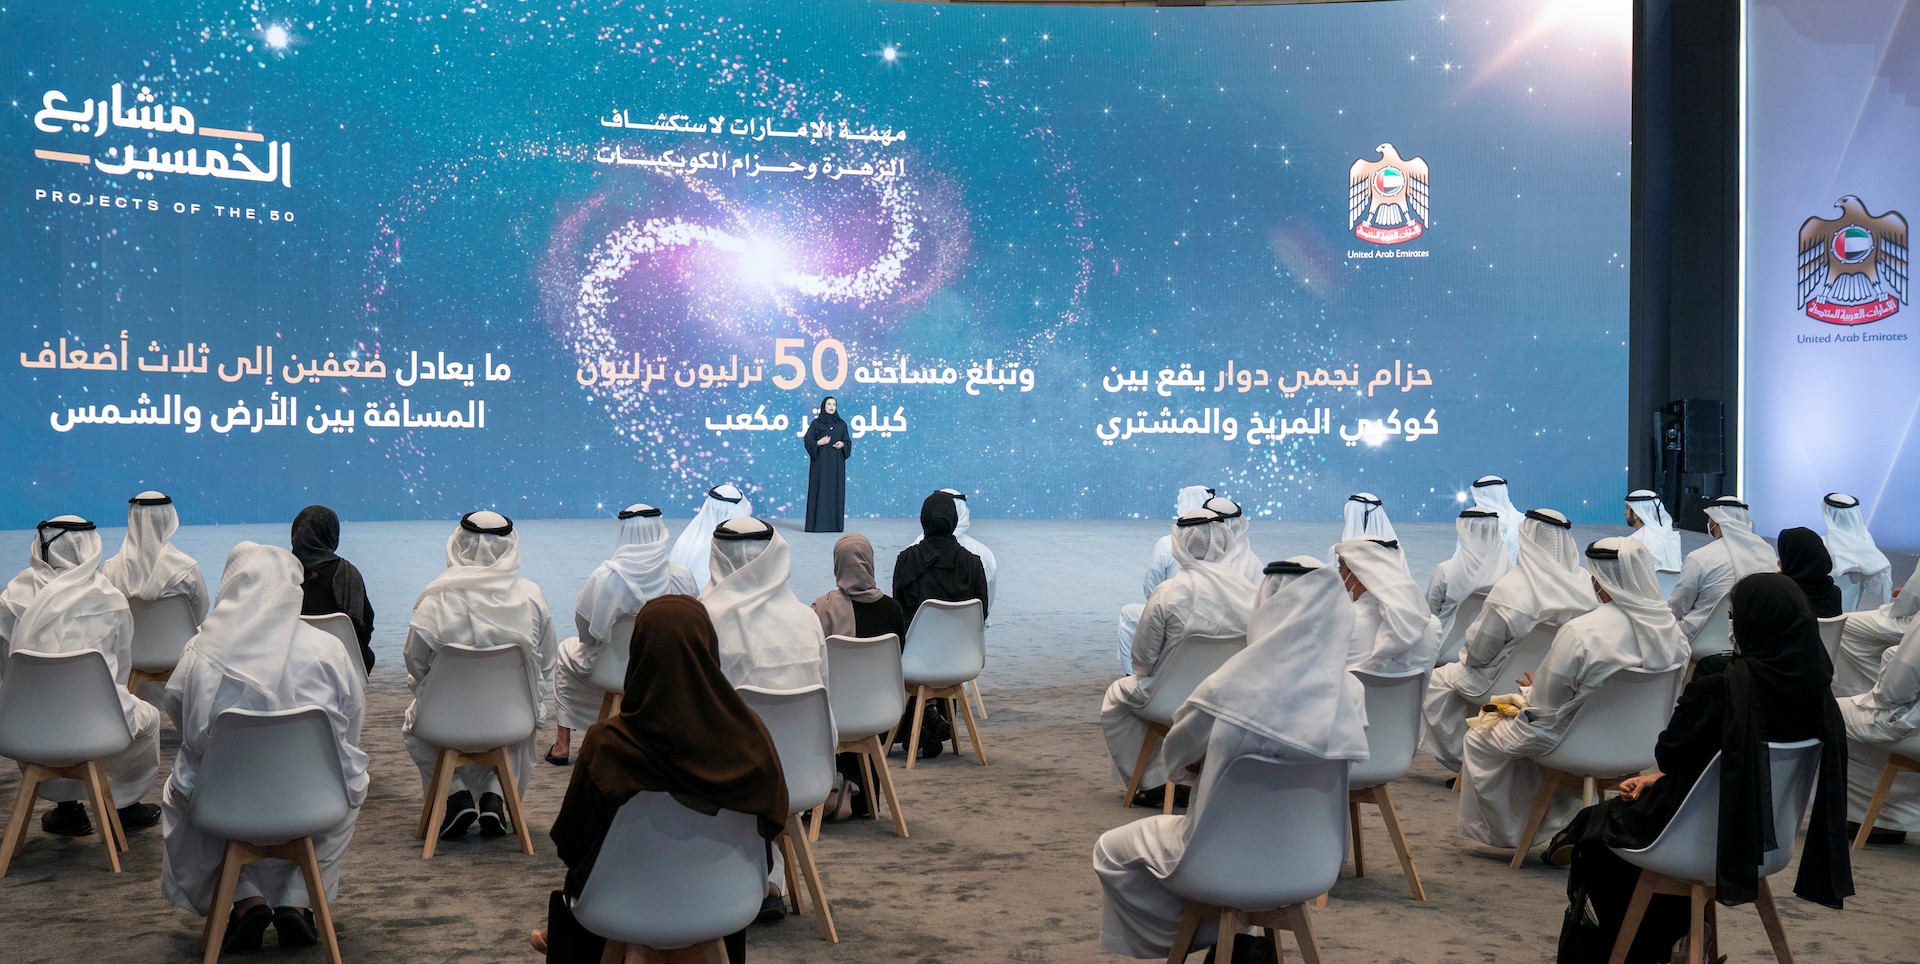 UAE Space Agency Announces planetary approach orbiting Venus and seven other Asteroid belts